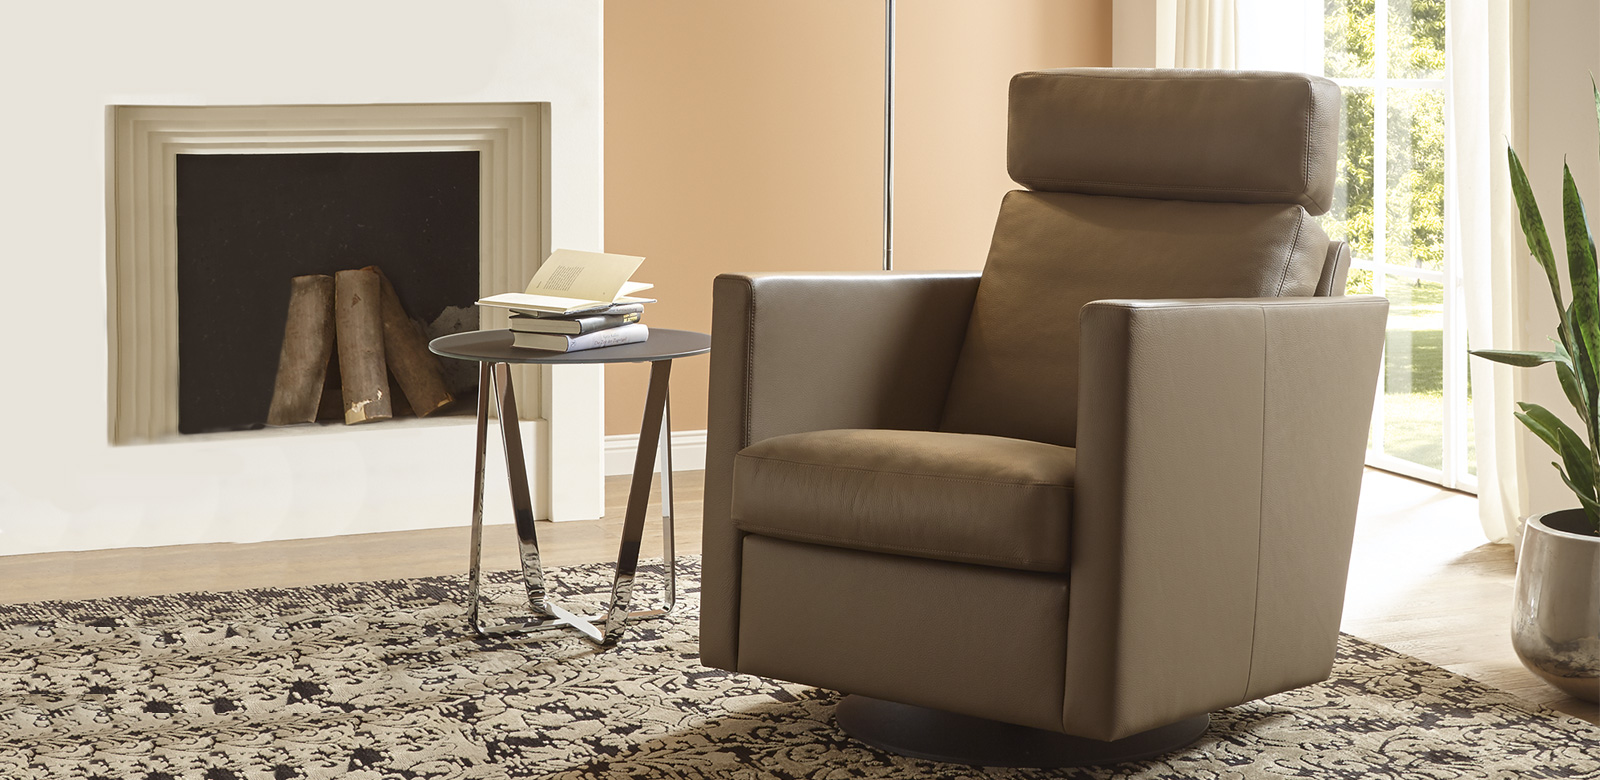 This slender armchair creation fits harmoniously into any configuration of our collections. A swivel plate and a rocker function for maximum seating comfort leave nothing to be desired.